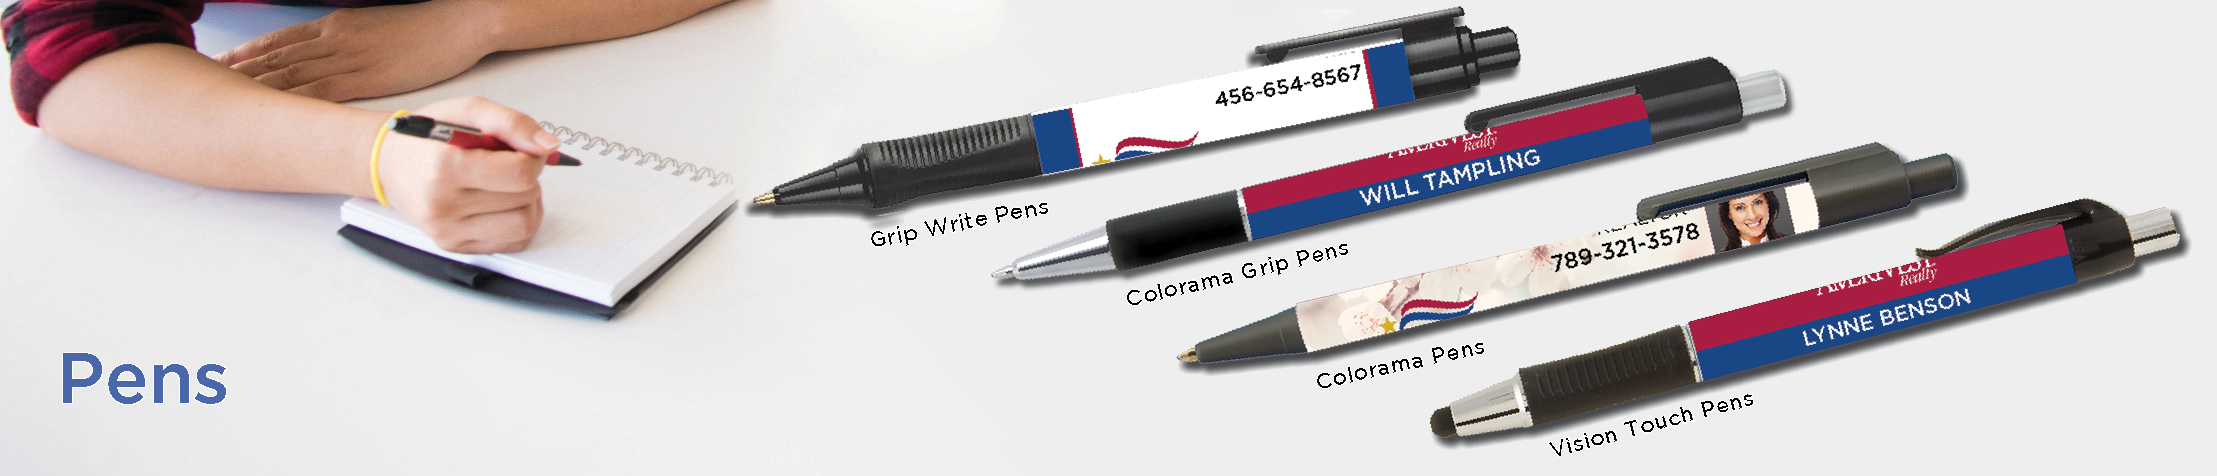 Amerivest Realty Real Estate Pens - Amerivest Realty  personalized realtor promotional products | BestPrintBuy.com